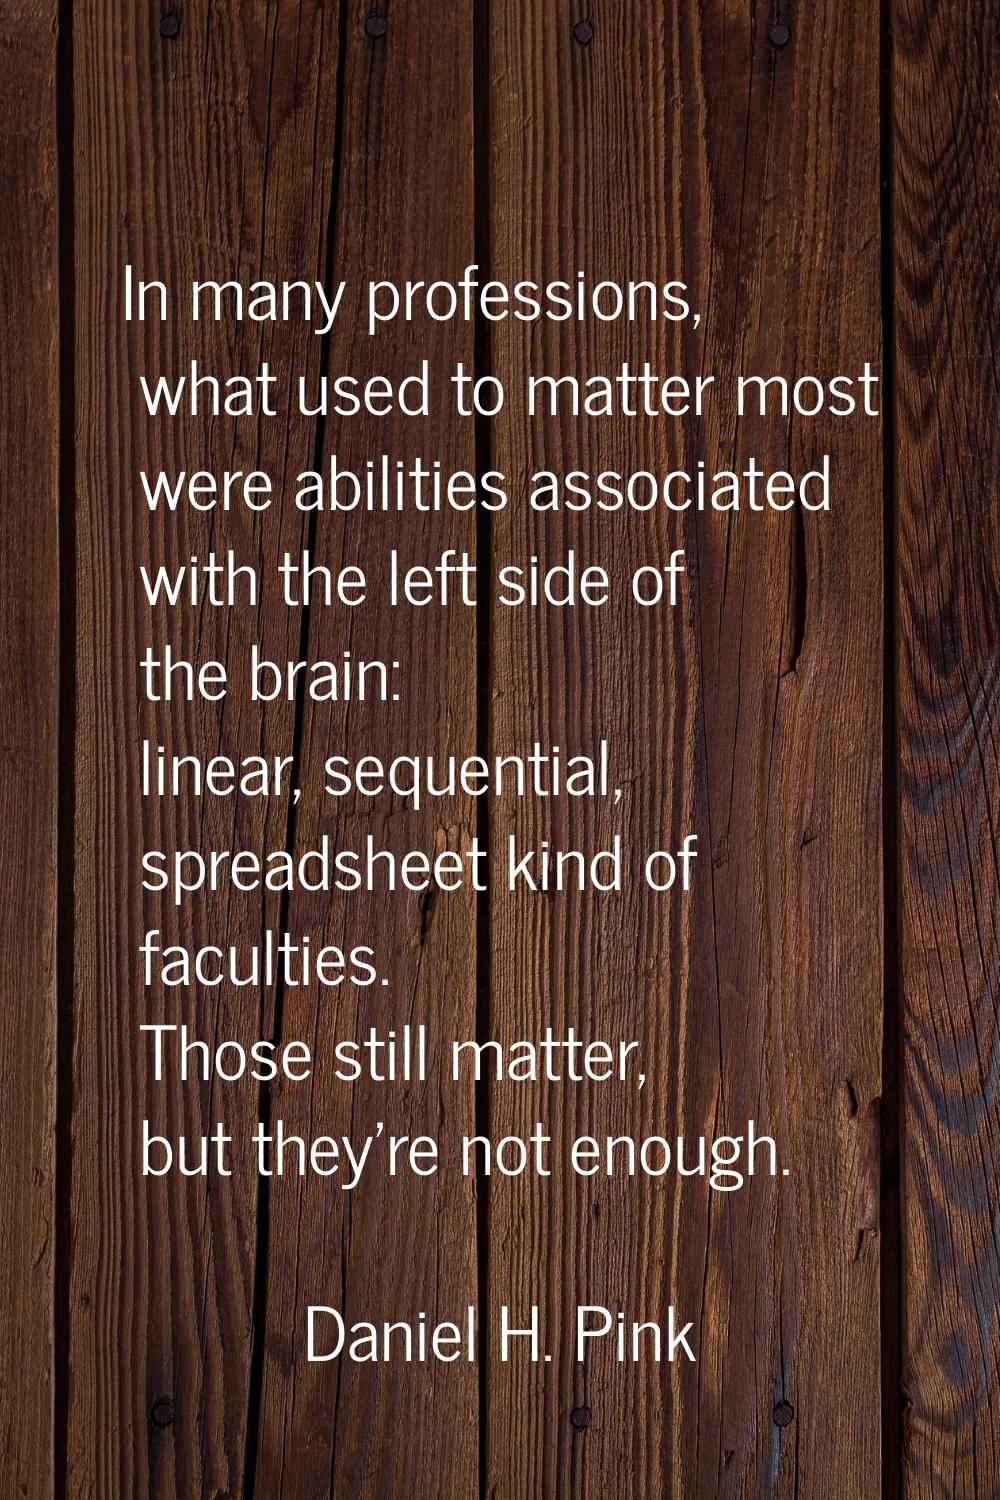 In many professions, what used to matter most were abilities associated with the left side of the b